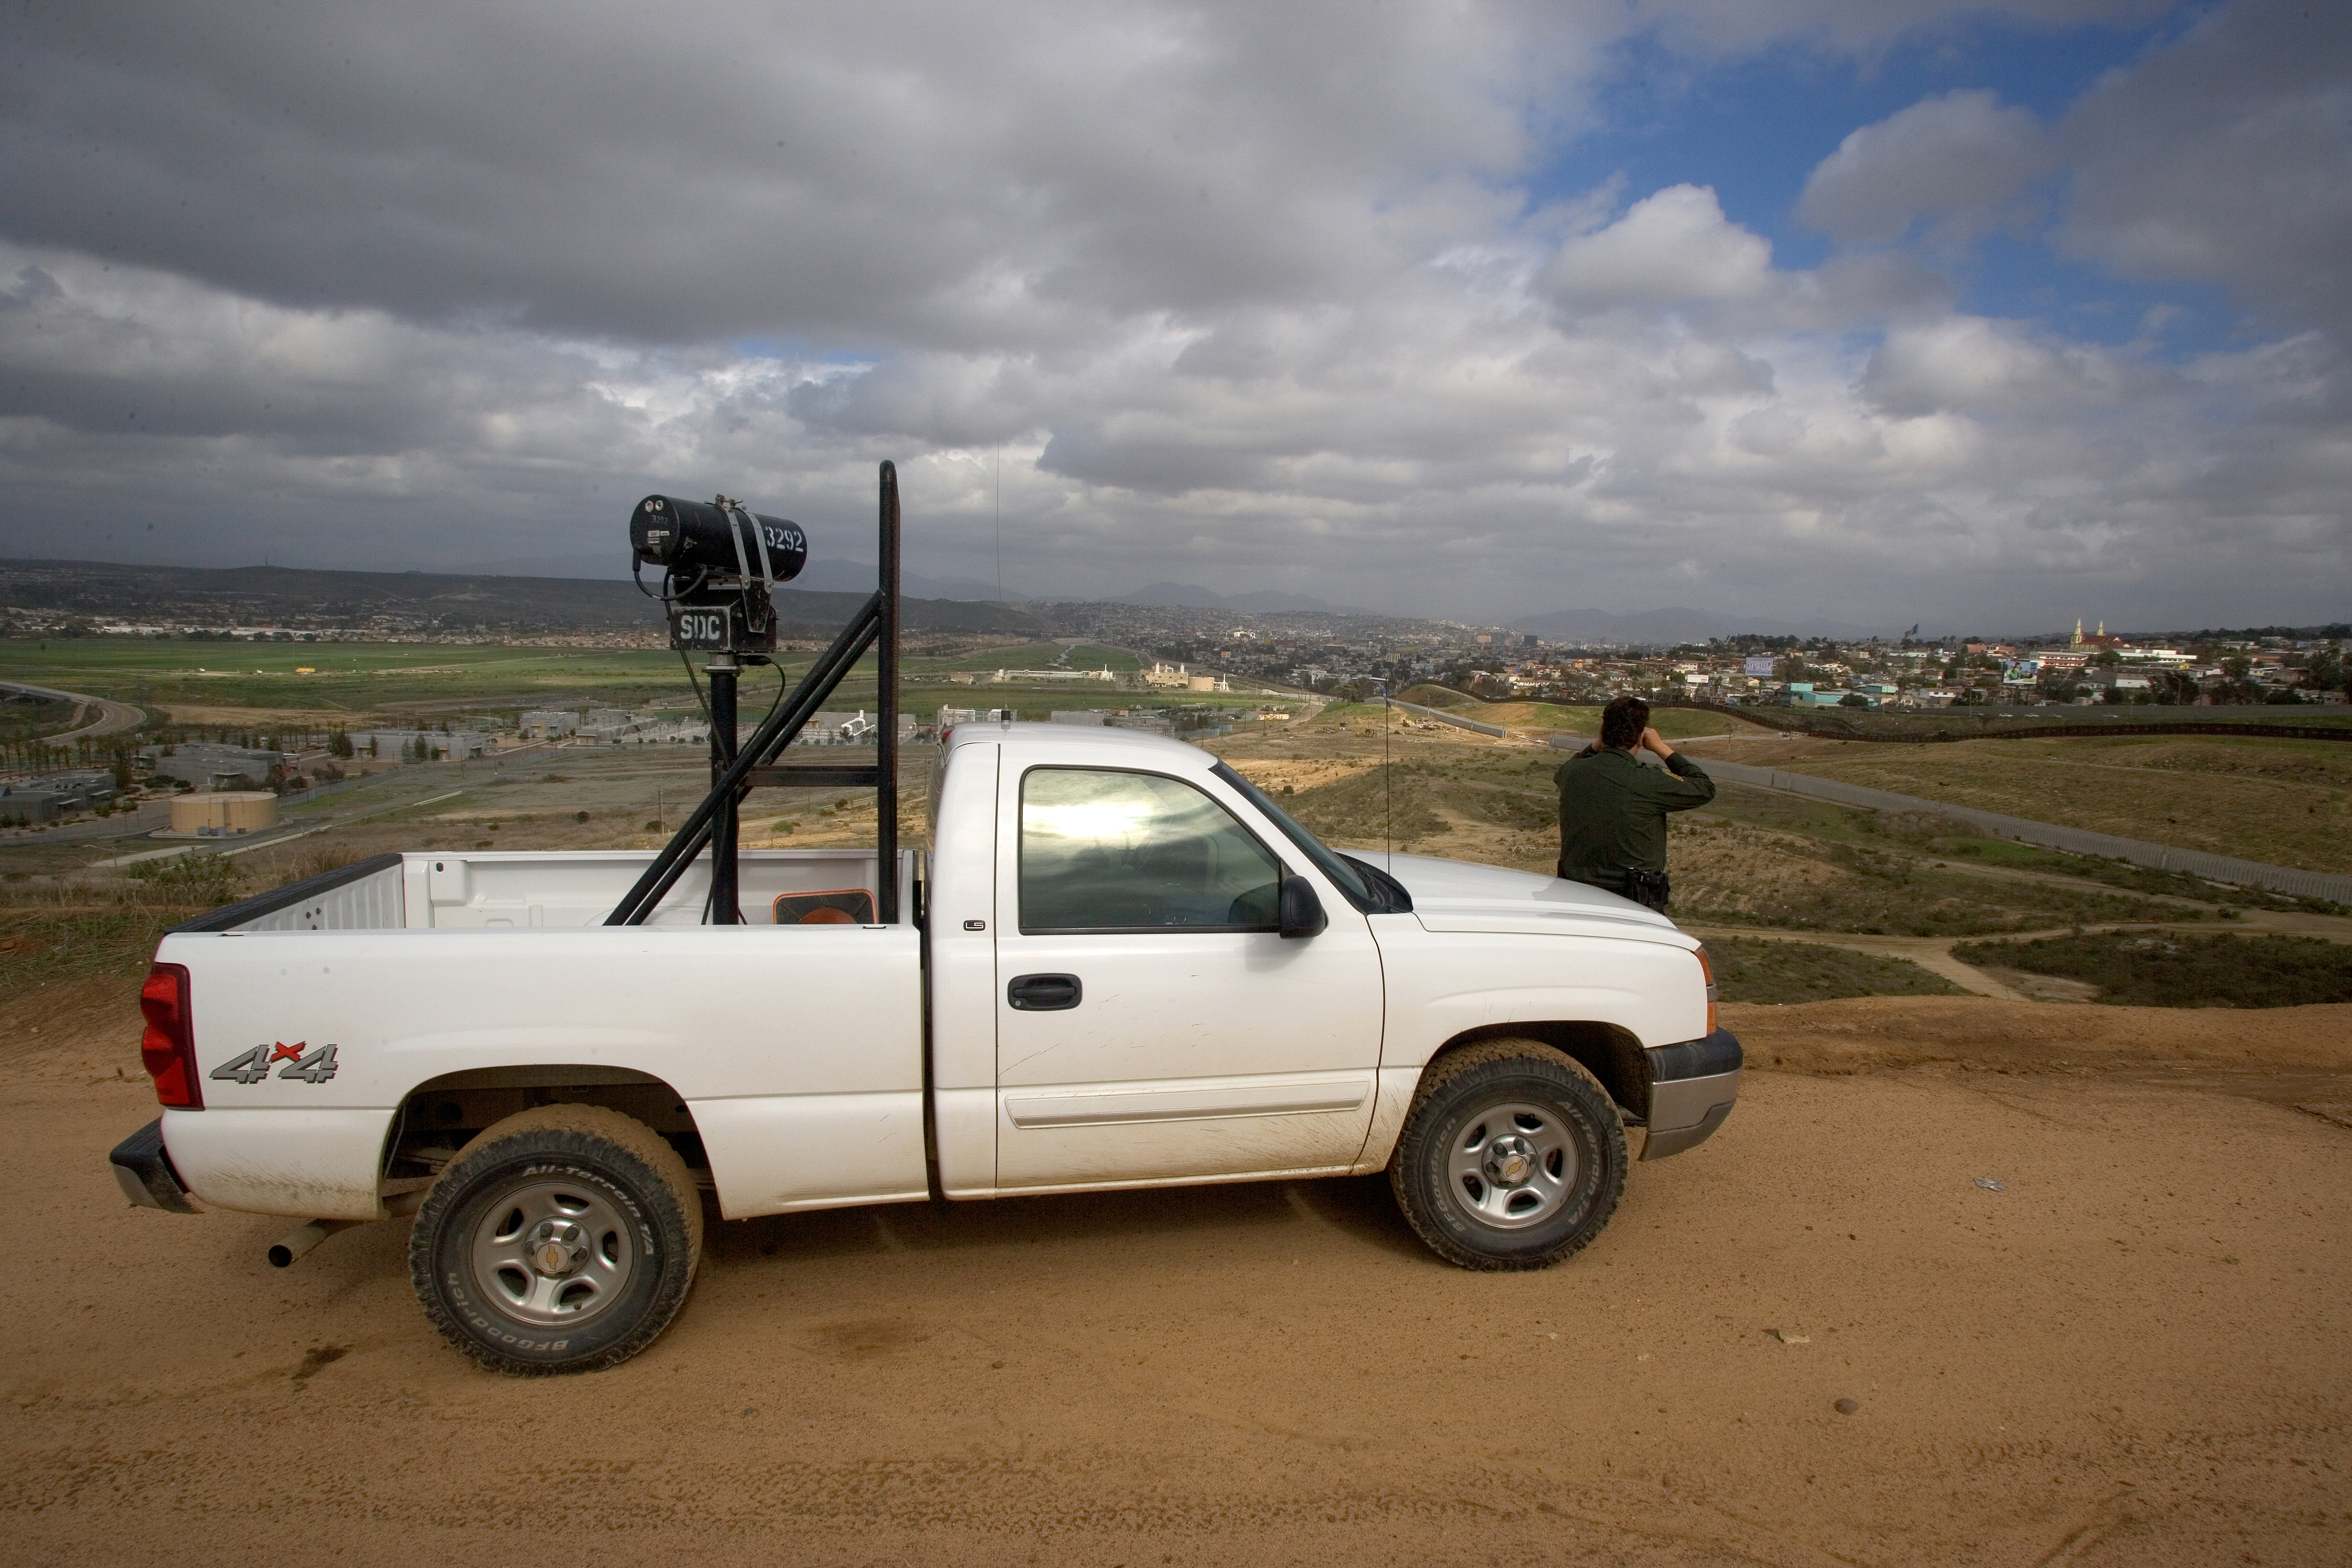 U.S. Border Patrol agent scans Imperial Valley area for signs of illegal crossings.